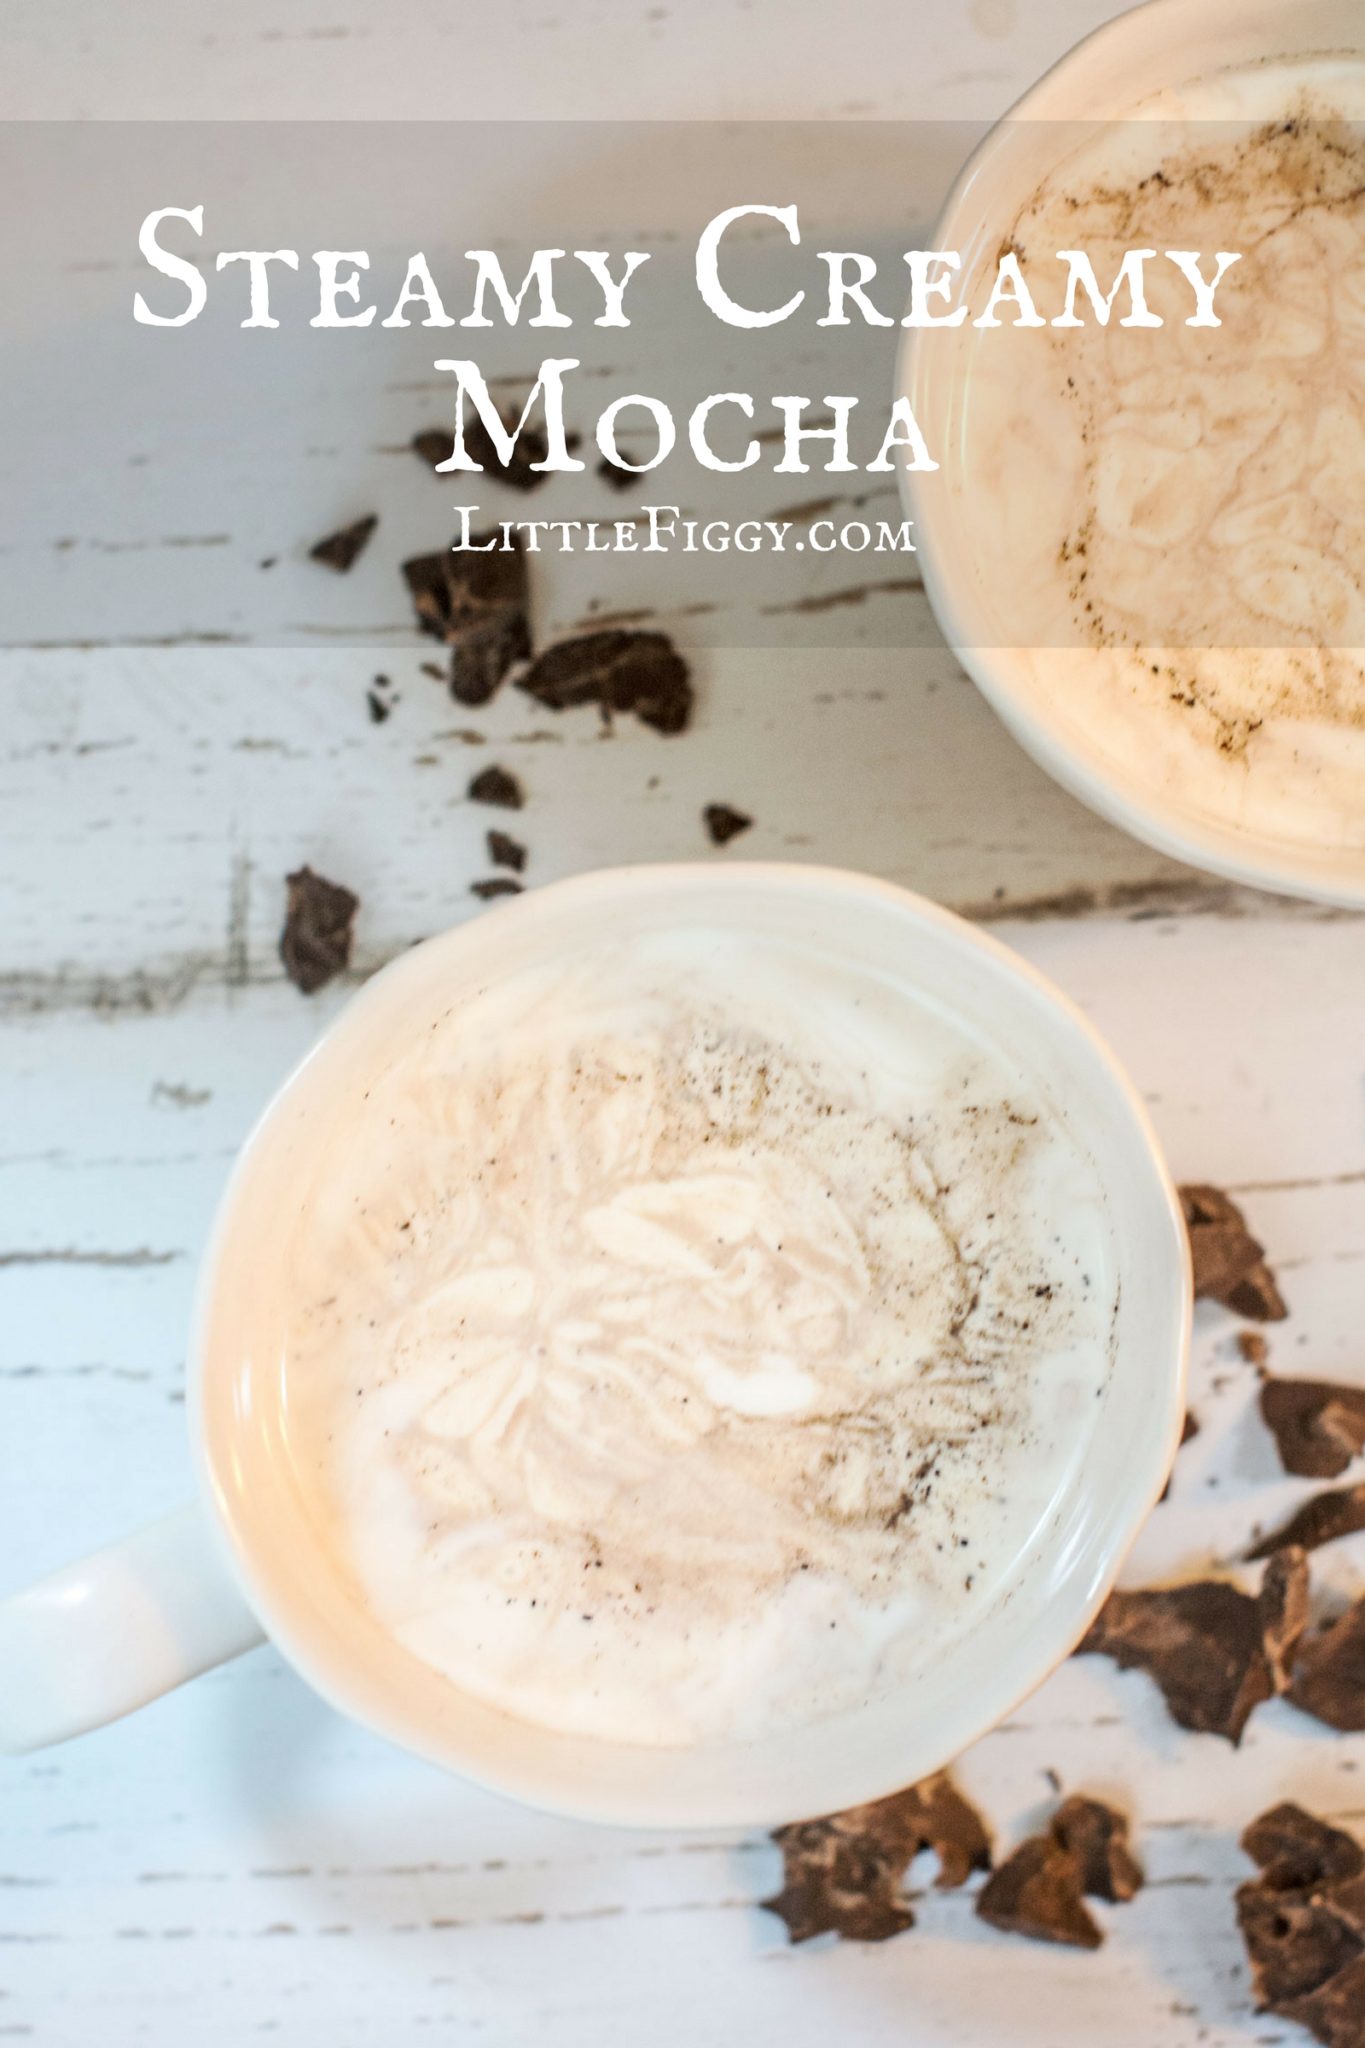 Steamy Creamy Mocha to keep you cozy warm during those cold days. Get the recipe at Little Figgy Food!